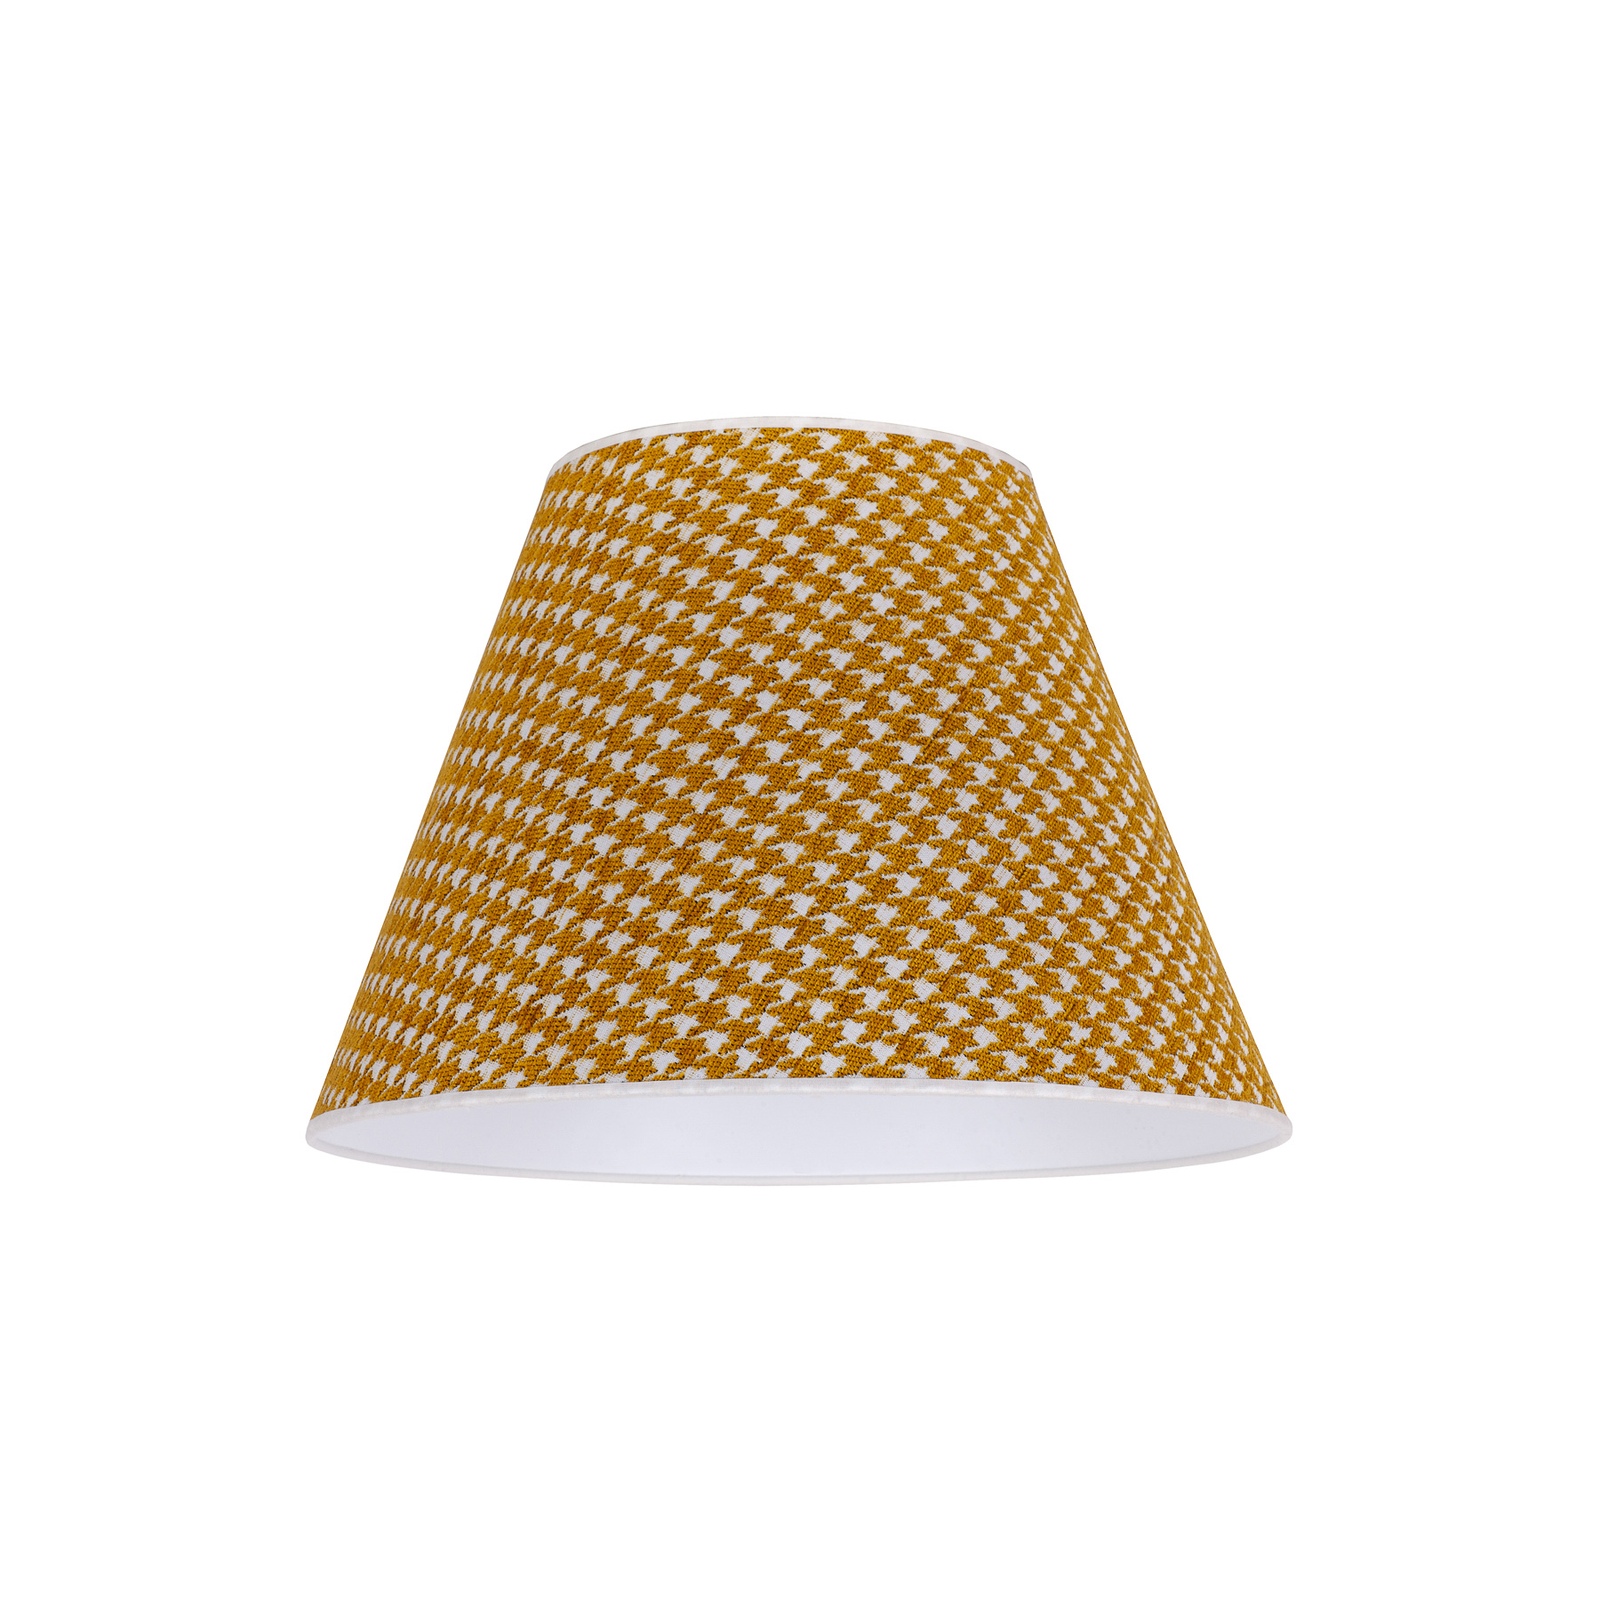 Sofia lampshade 26 cm, houndstooth pattern yellow